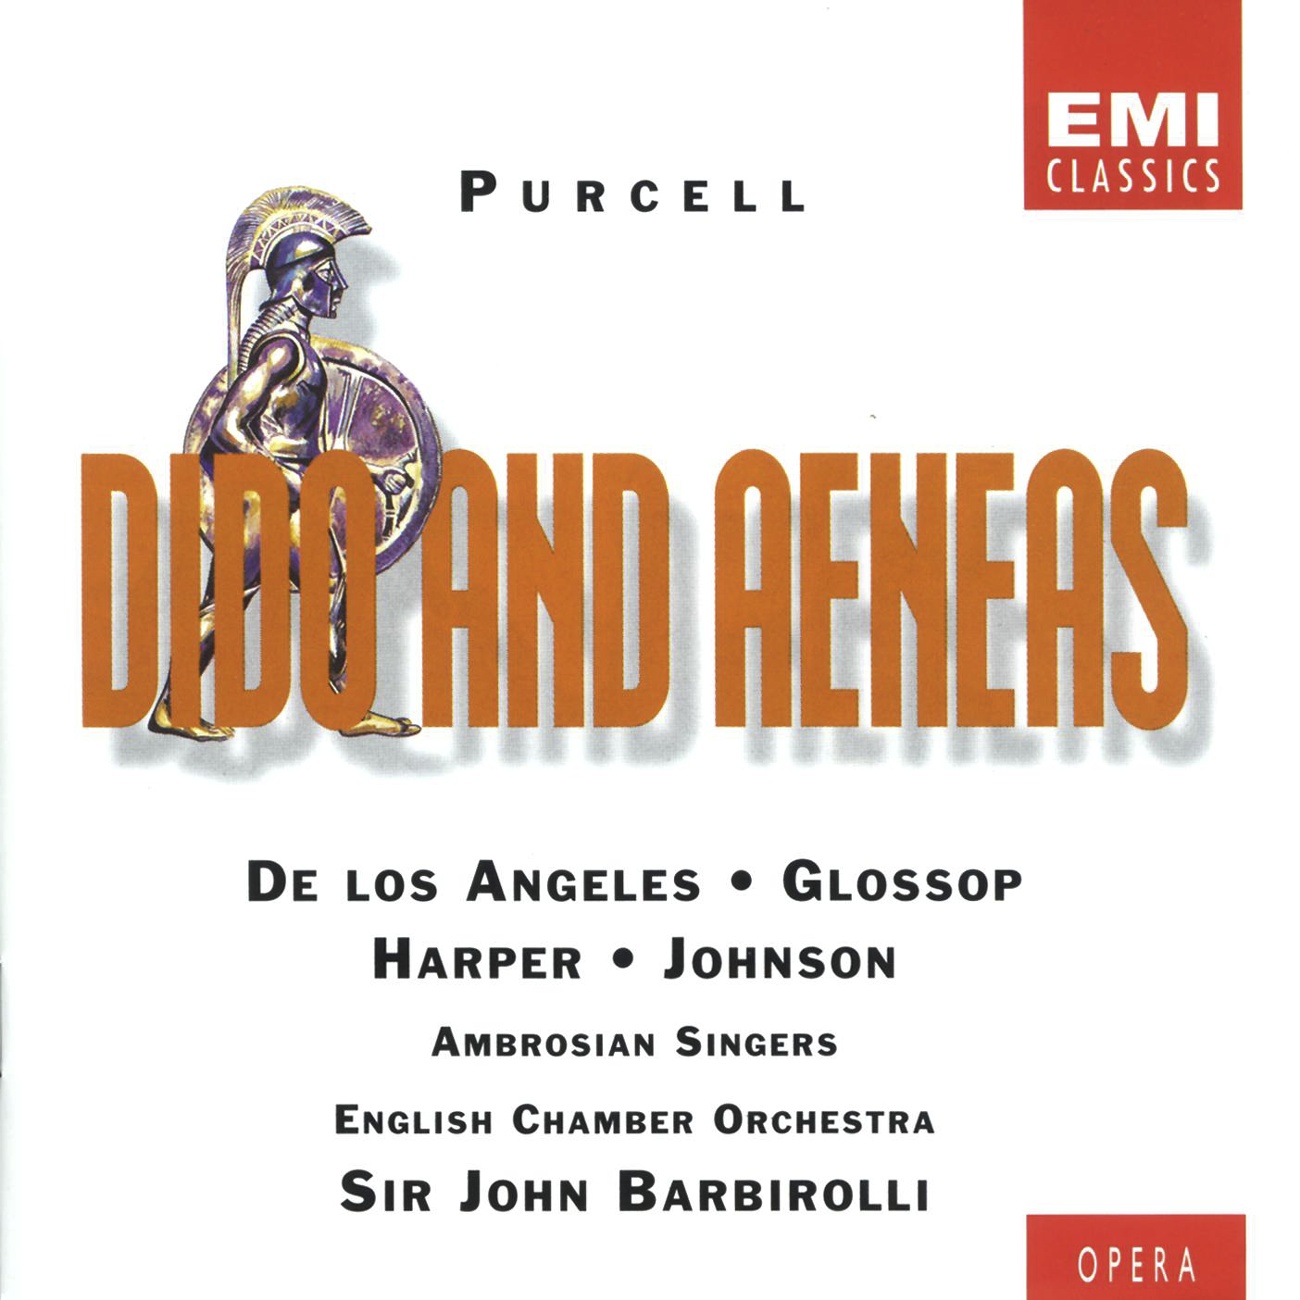 PURCELL: DIDO AND AENEAS: GREAT MINDS AGAINST THEMSELVES CONSPIRE